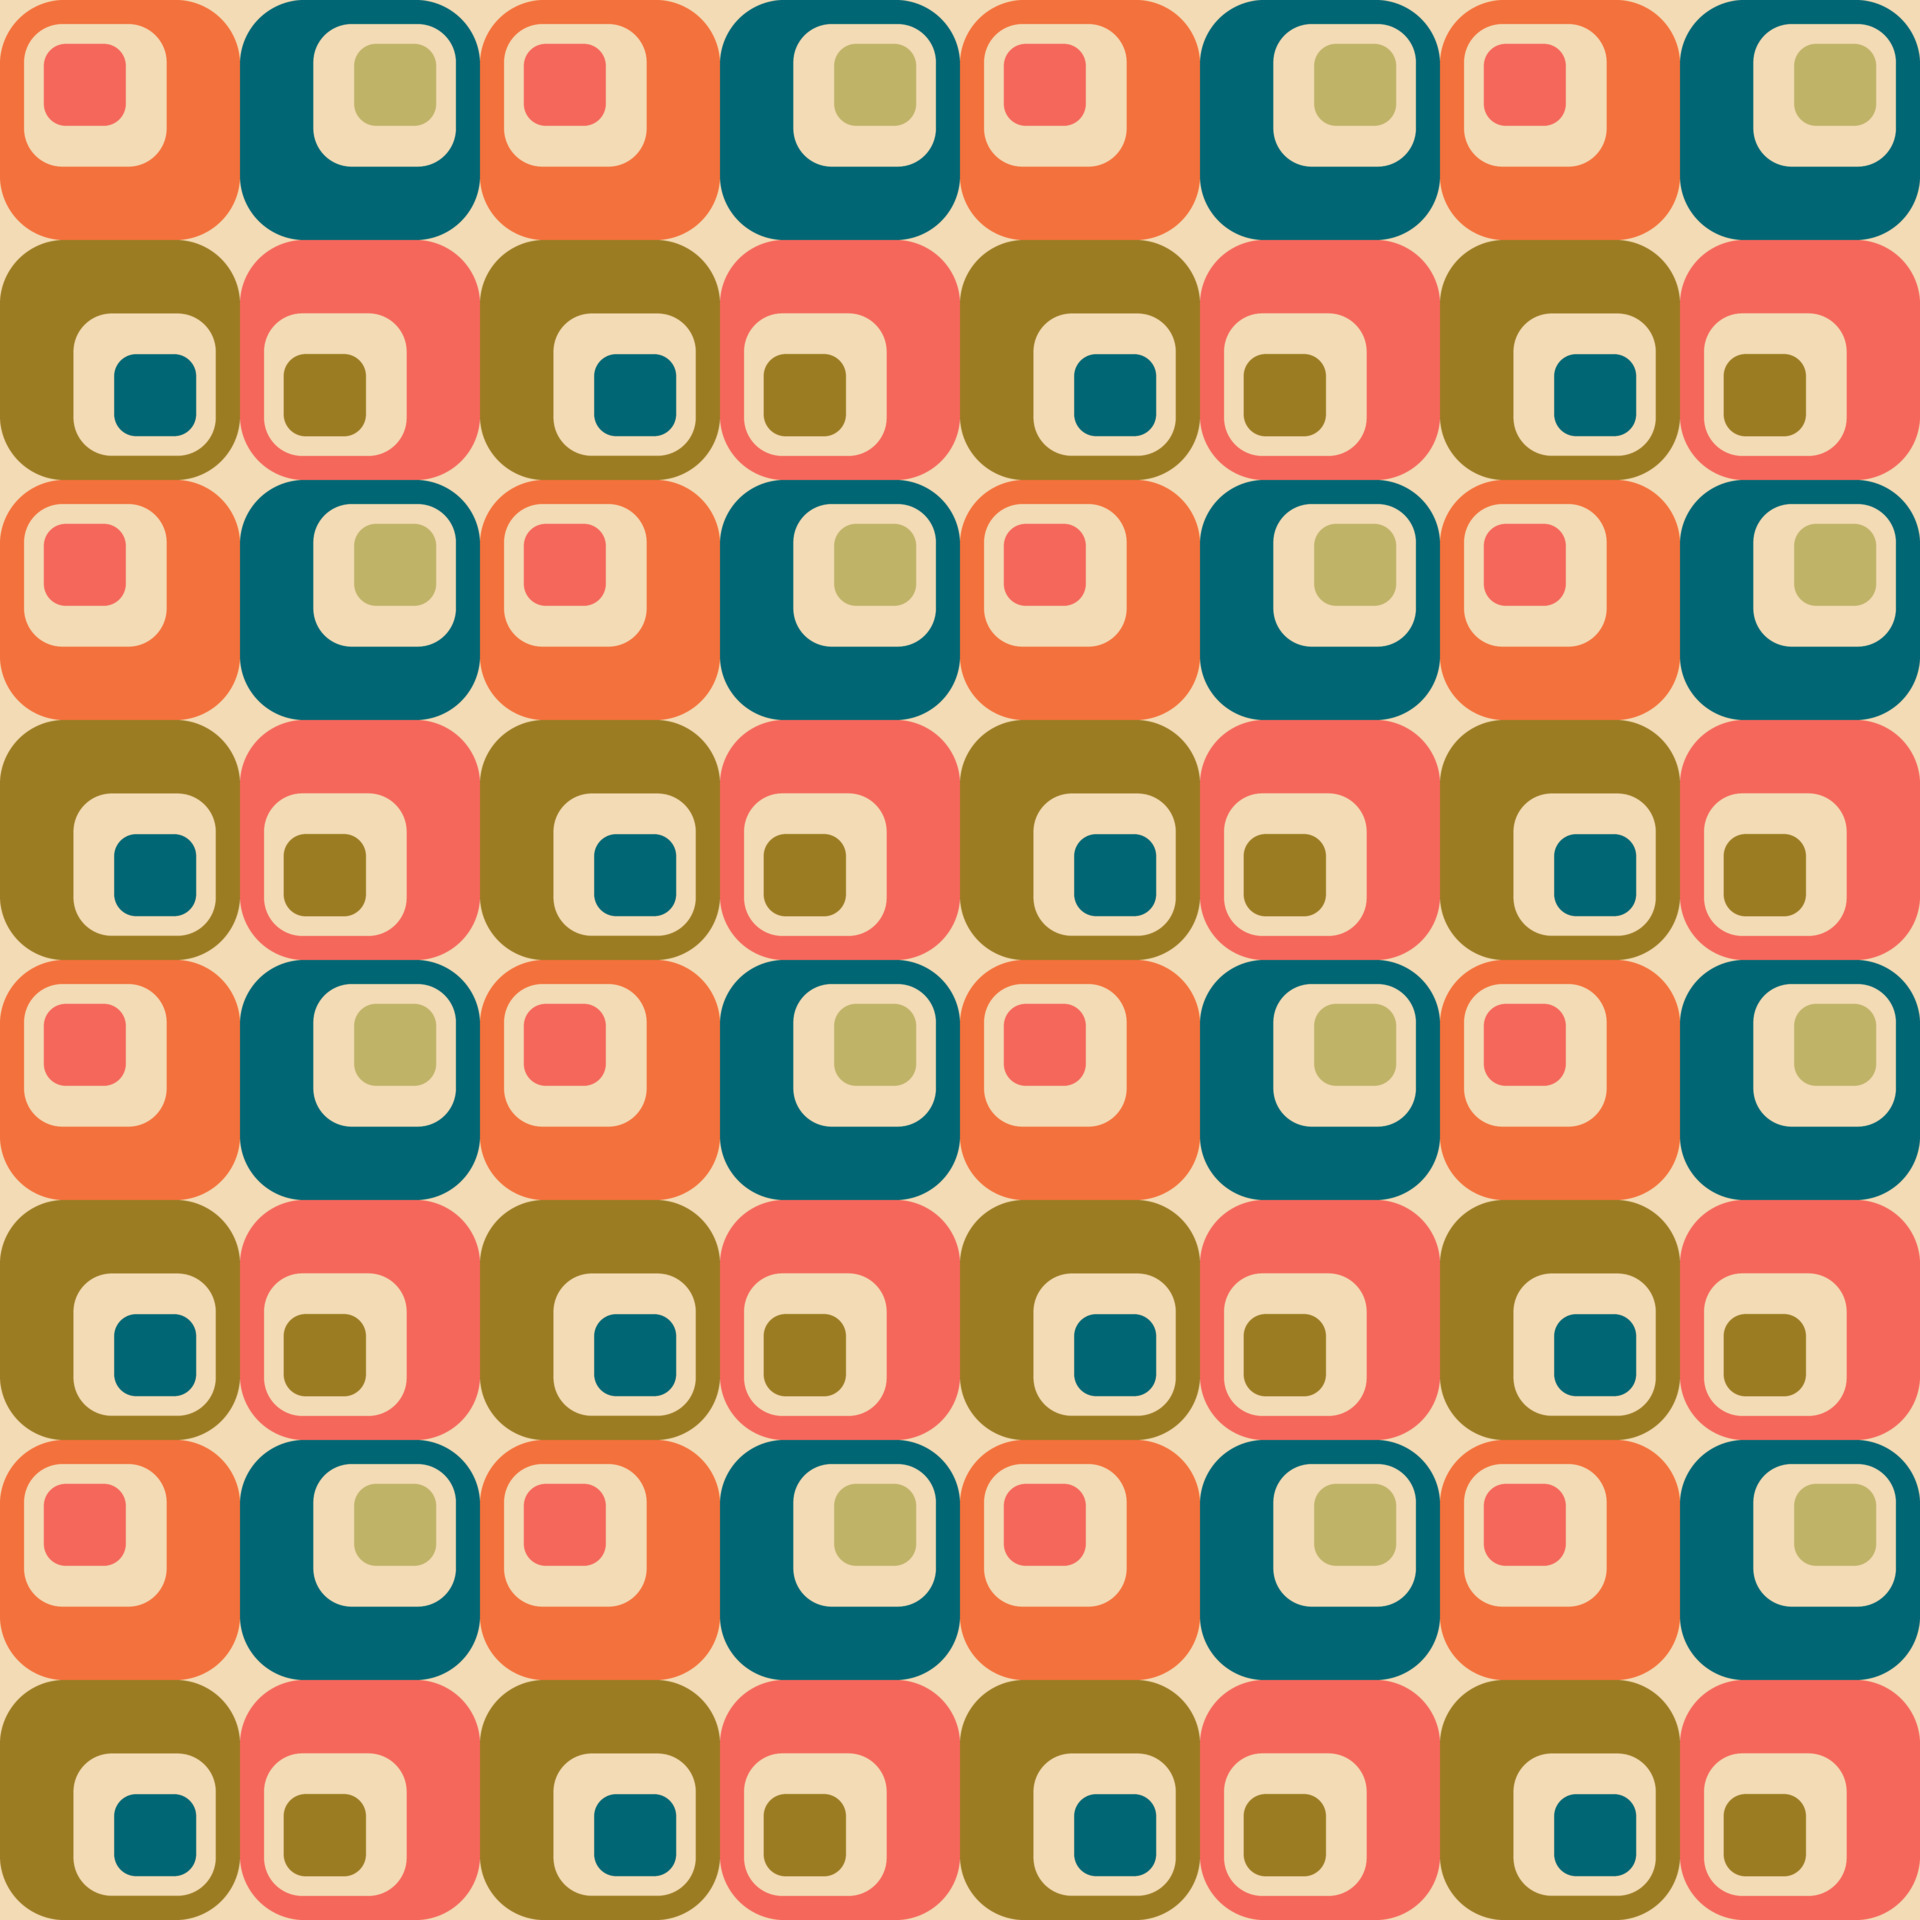 https://static.vecteezy.com/system/resources/previews/014/609/513/original/aesthetic-mid-century-printable-seamless-pattern-with-retro-design-decorative-50s-60s-70s-style-vintage-modern-background-in-minimalist-mid-century-style-for-fabric-wallpaper-or-wrapping-vector.jpg